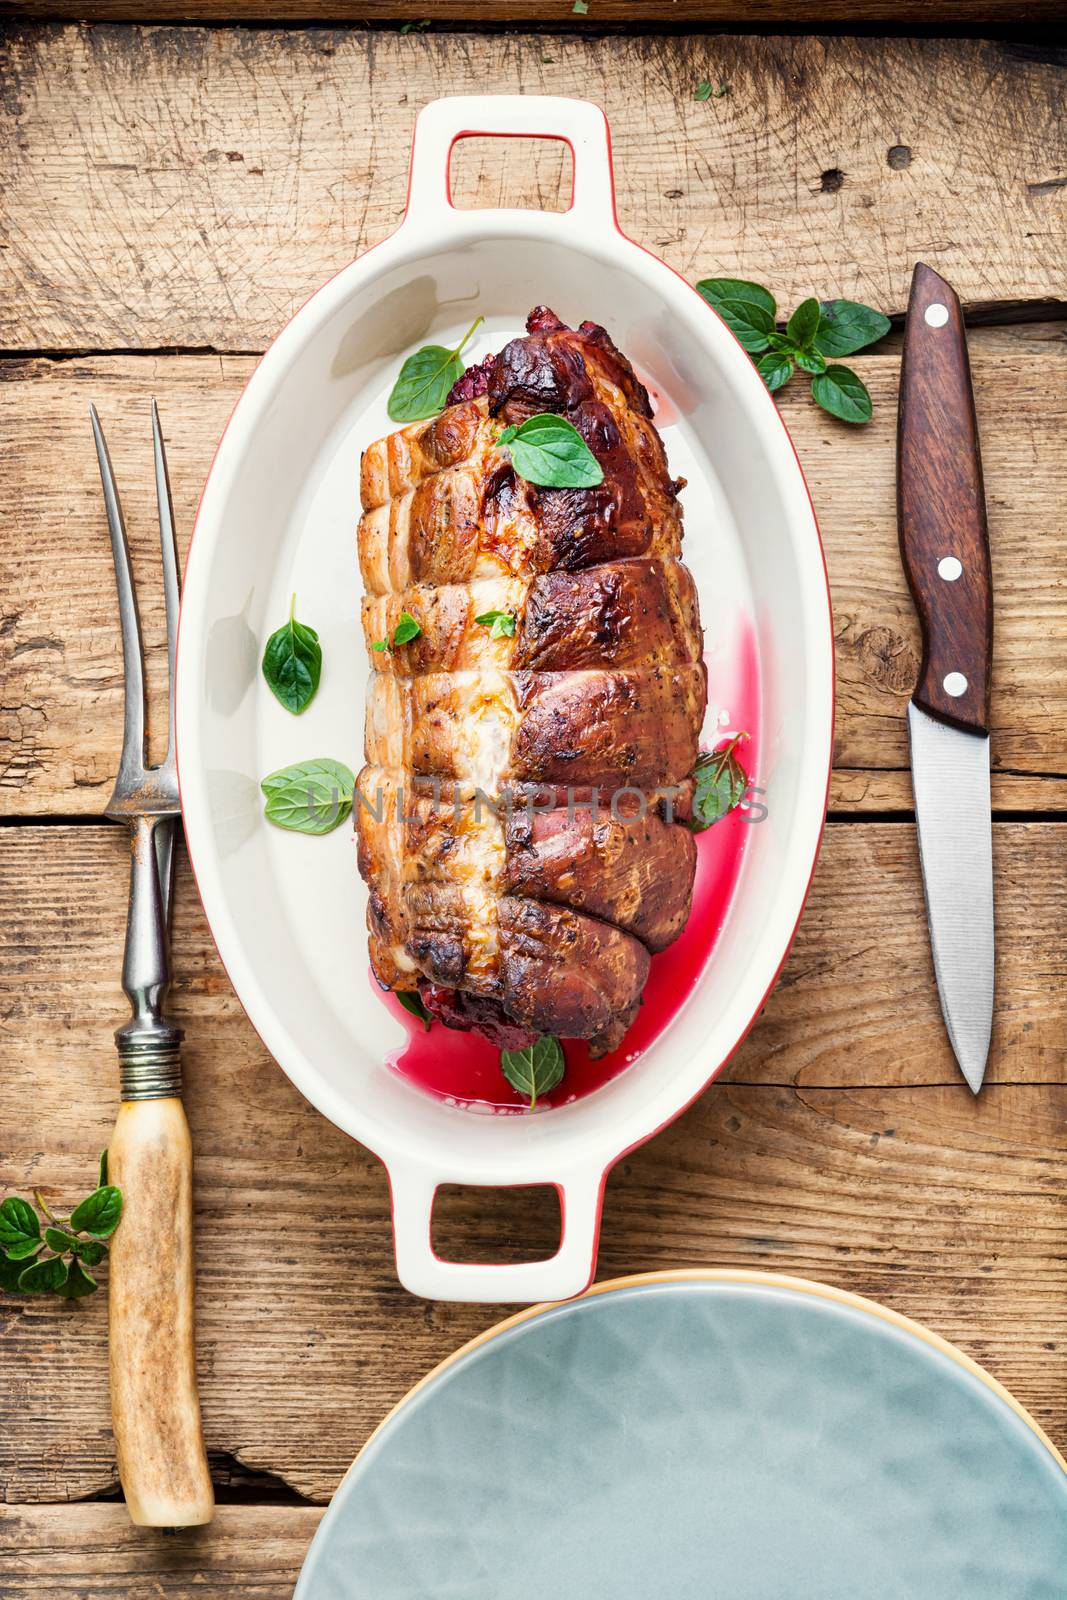 Roasted pork with cherry filling.Baked pork in a baking dish